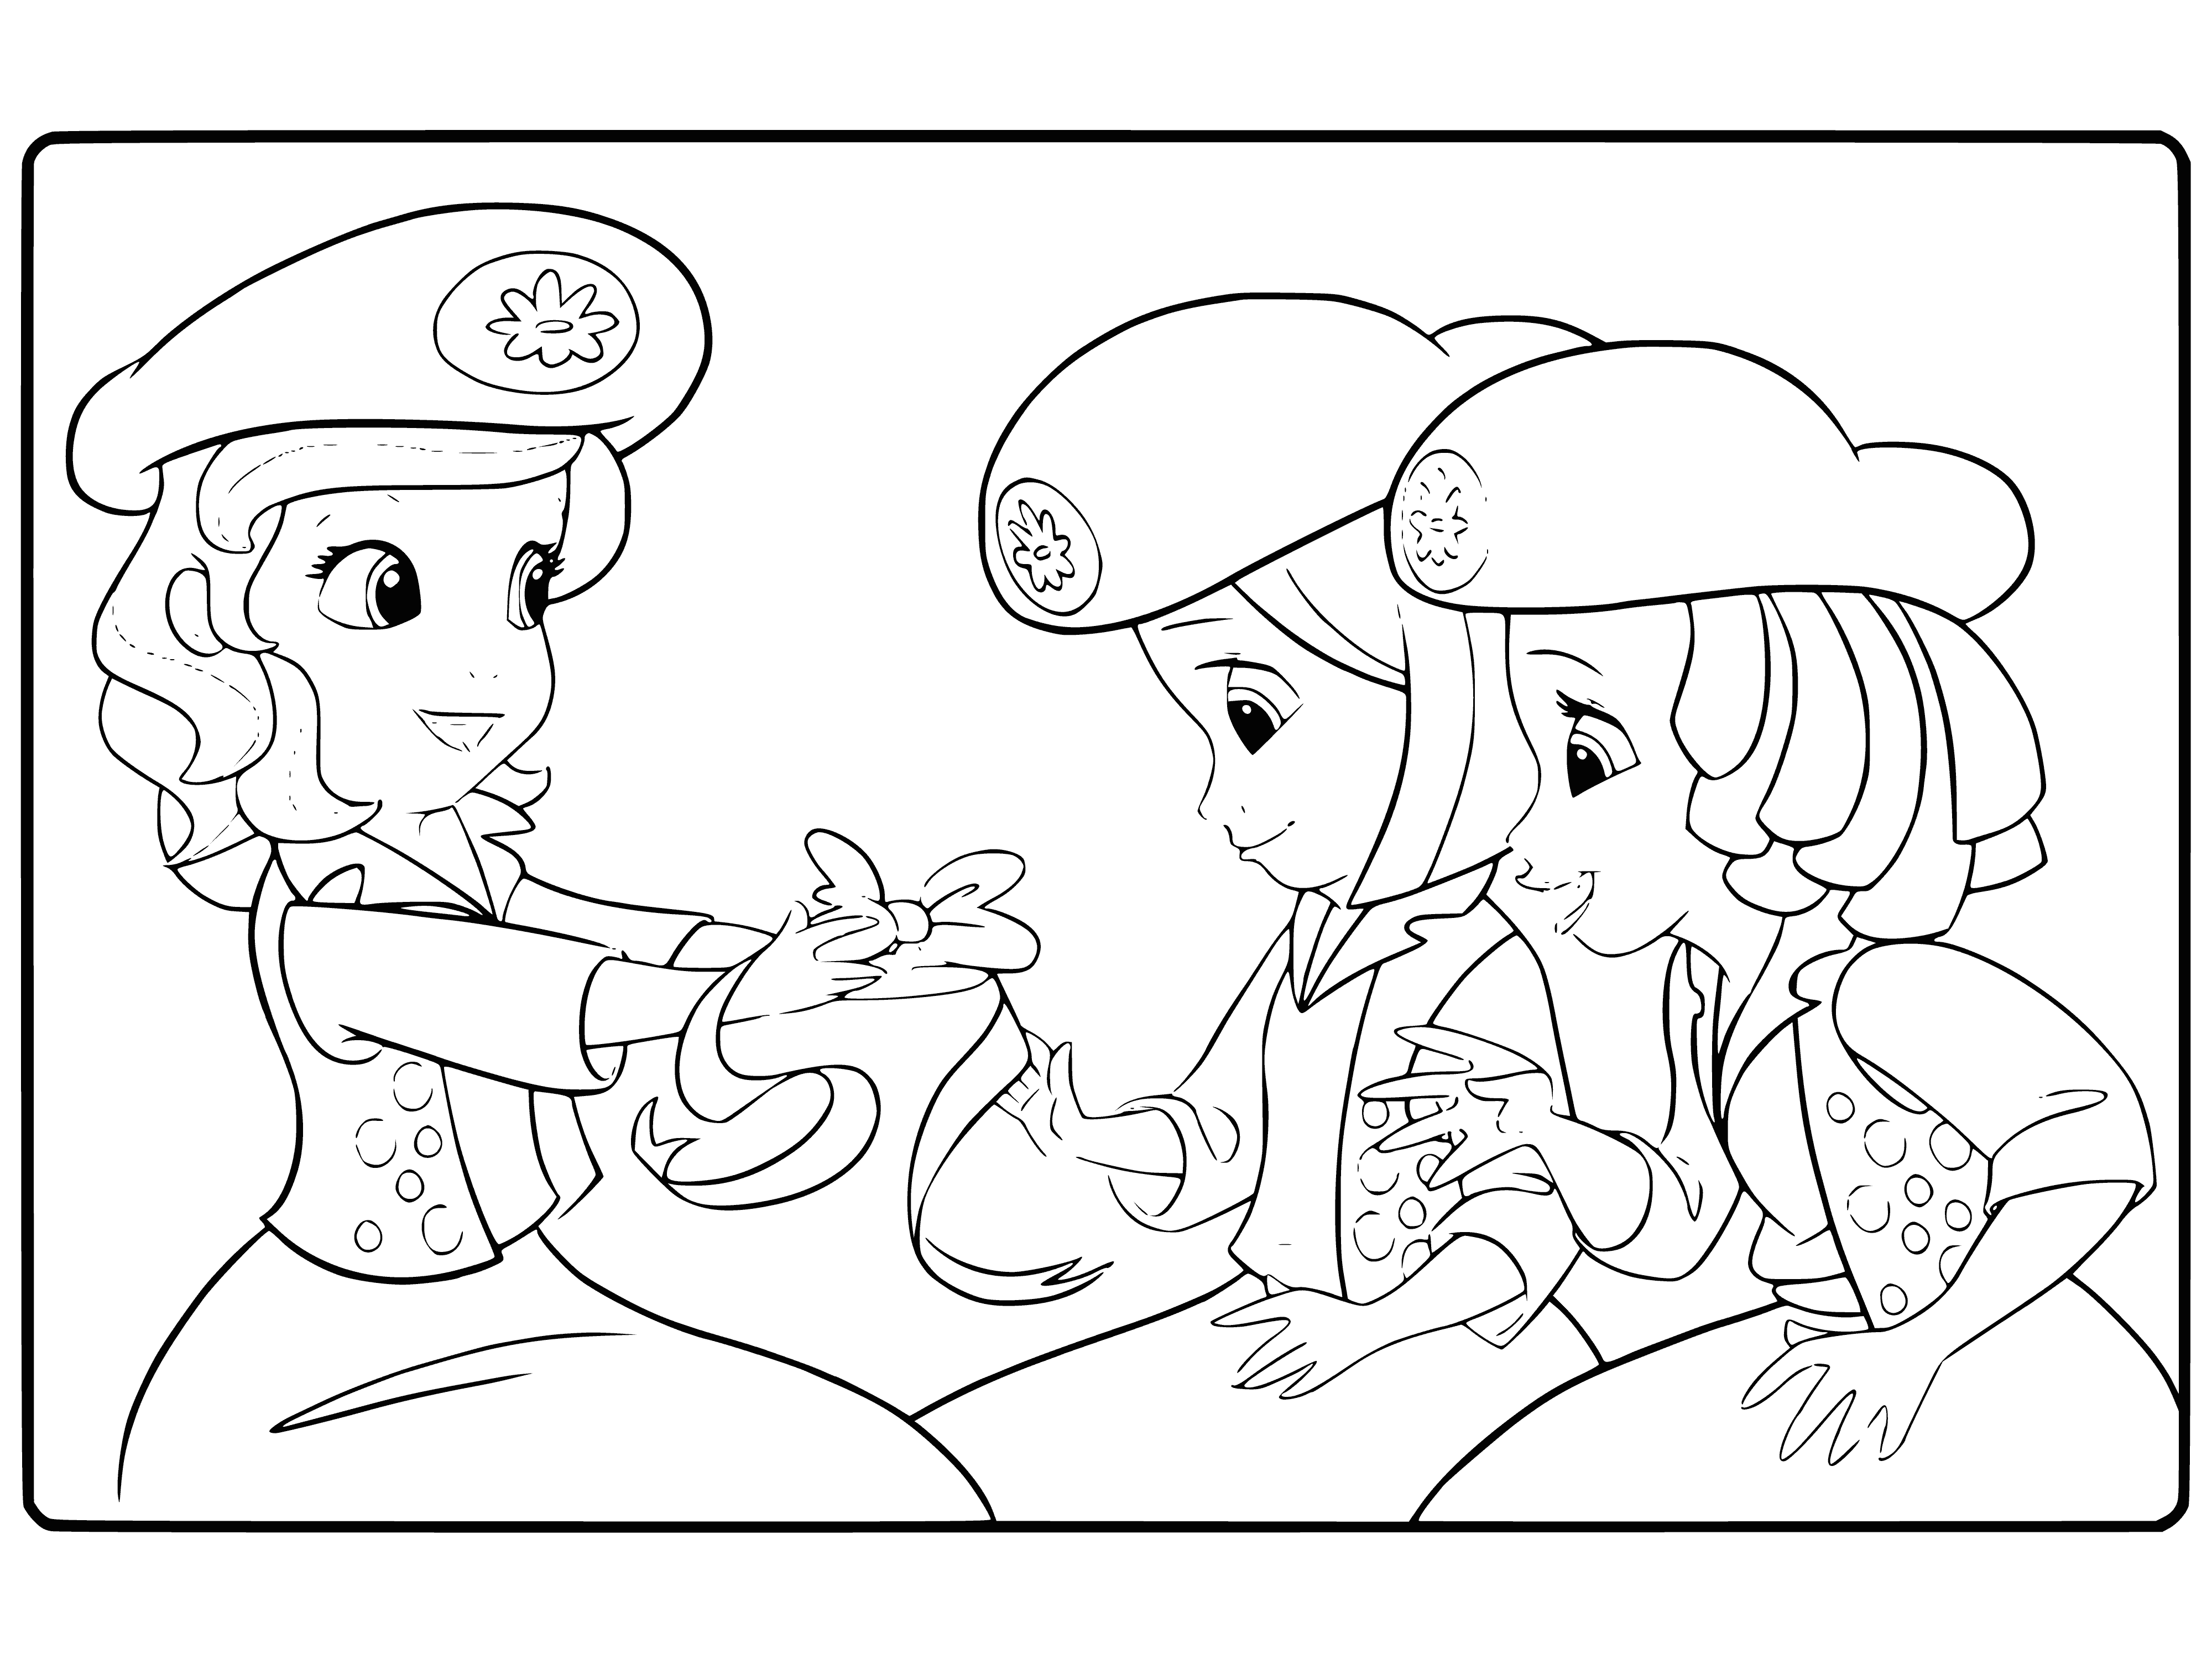 coloring page: Sofia and two friends look in awe at something off-screen while she holds a pink flower.